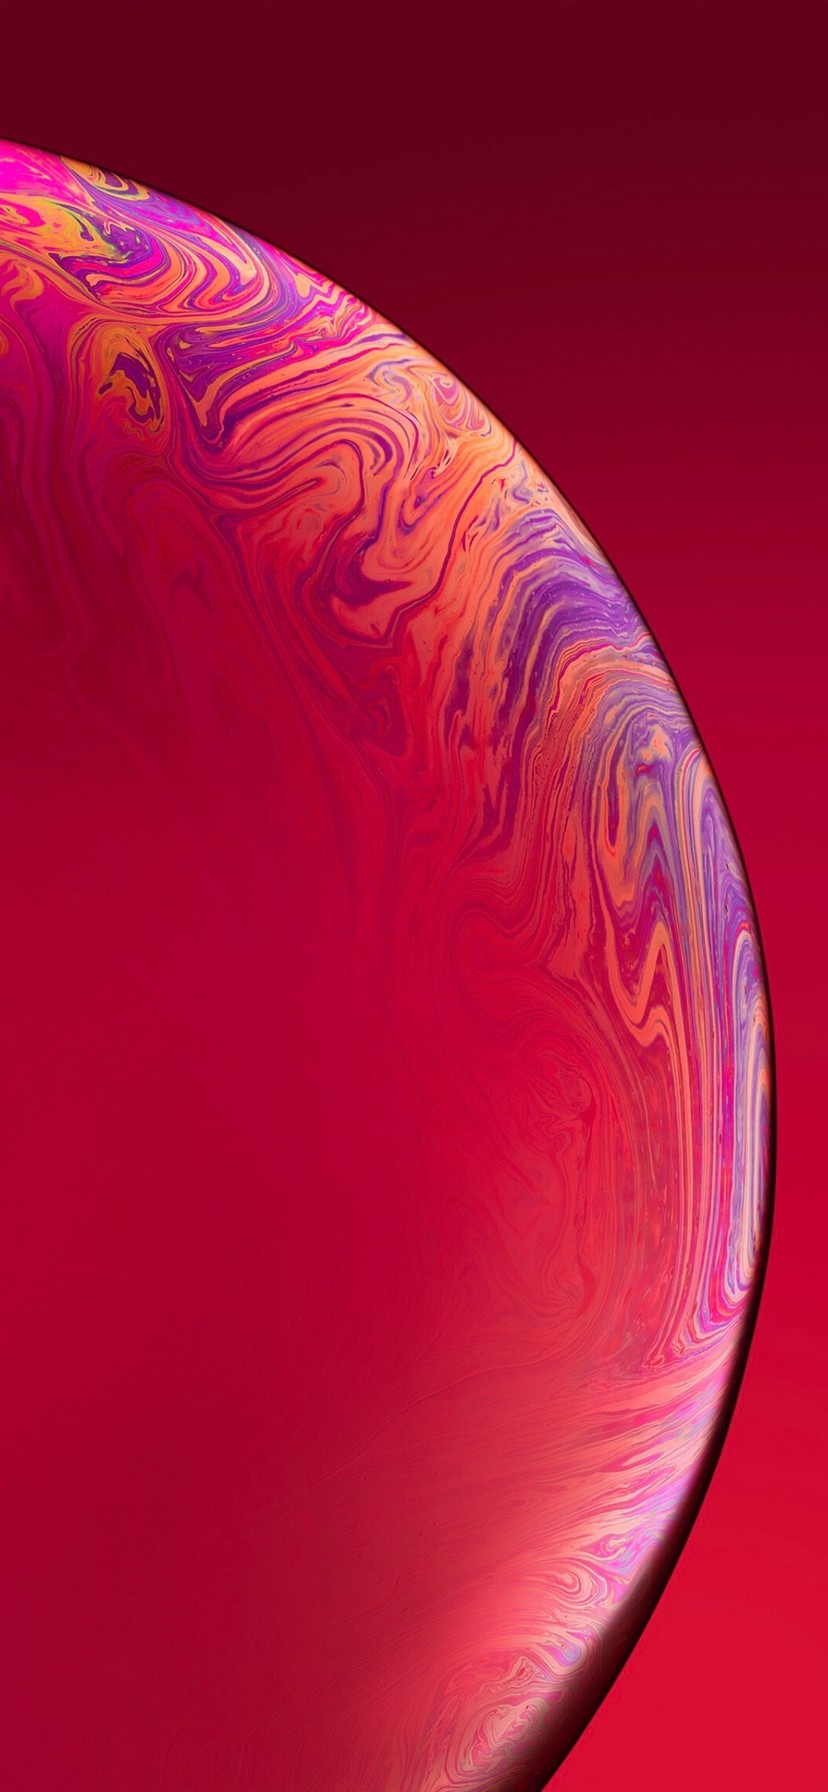 Iphone Xr Home Screen Wallpaper With High-resolution - Iphone Xr Home Screen , HD Wallpaper & Backgrounds